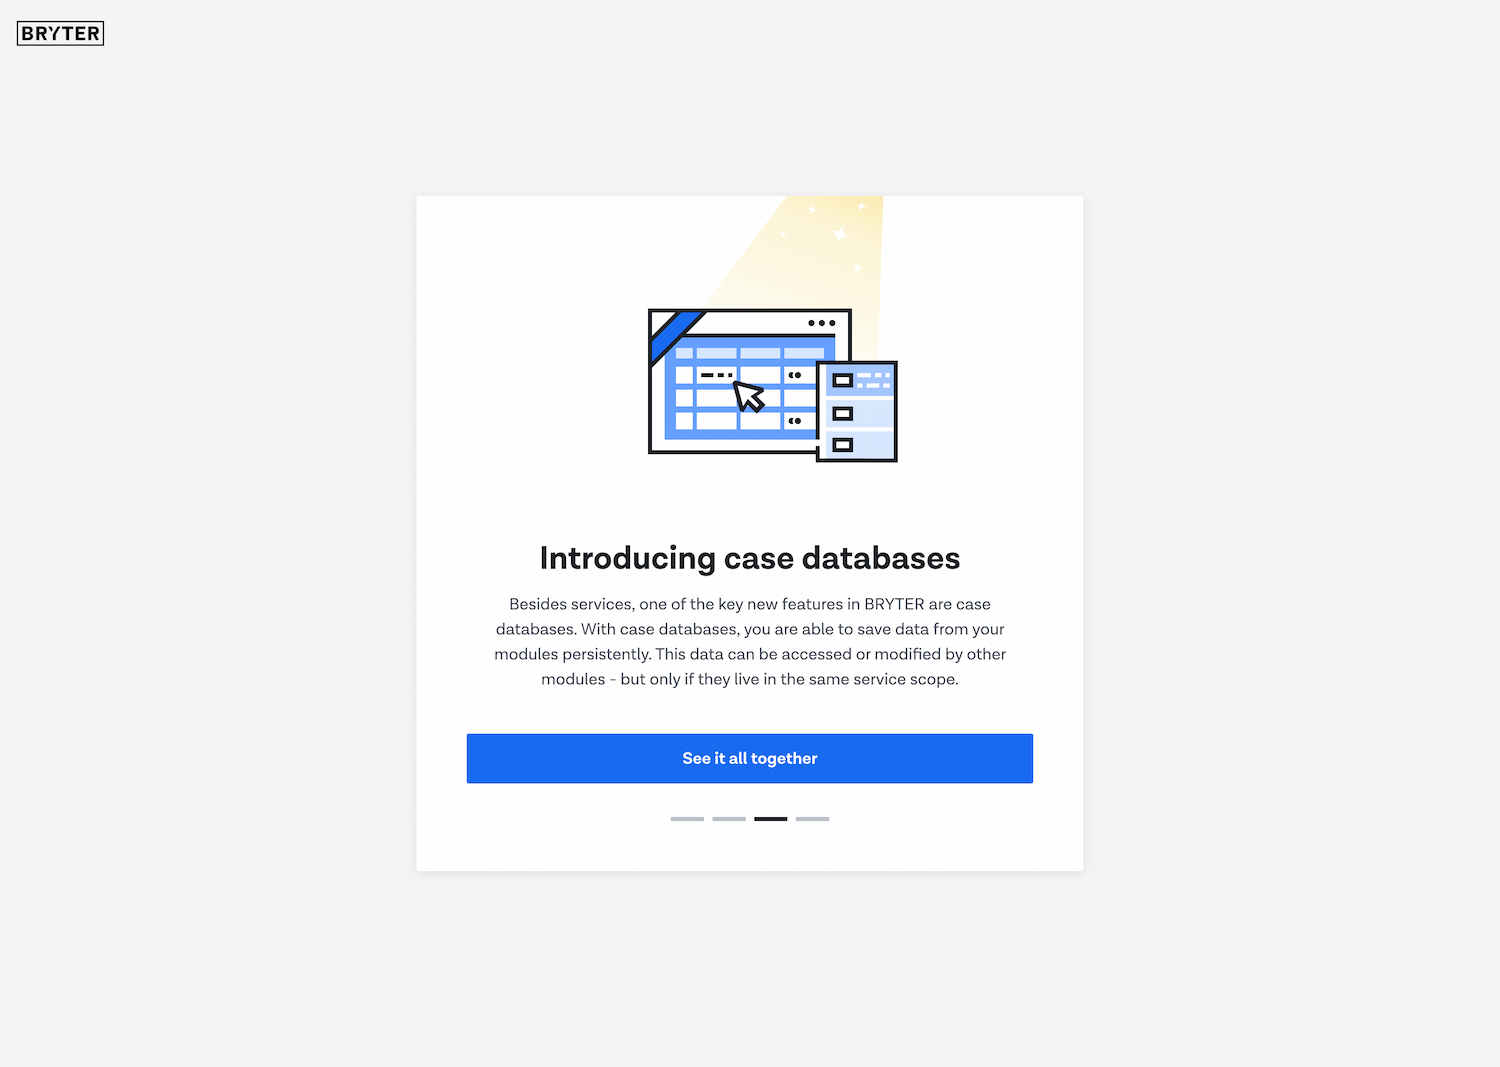 Screenshot from a case database onboarding screen step showing a big illustration at the top.